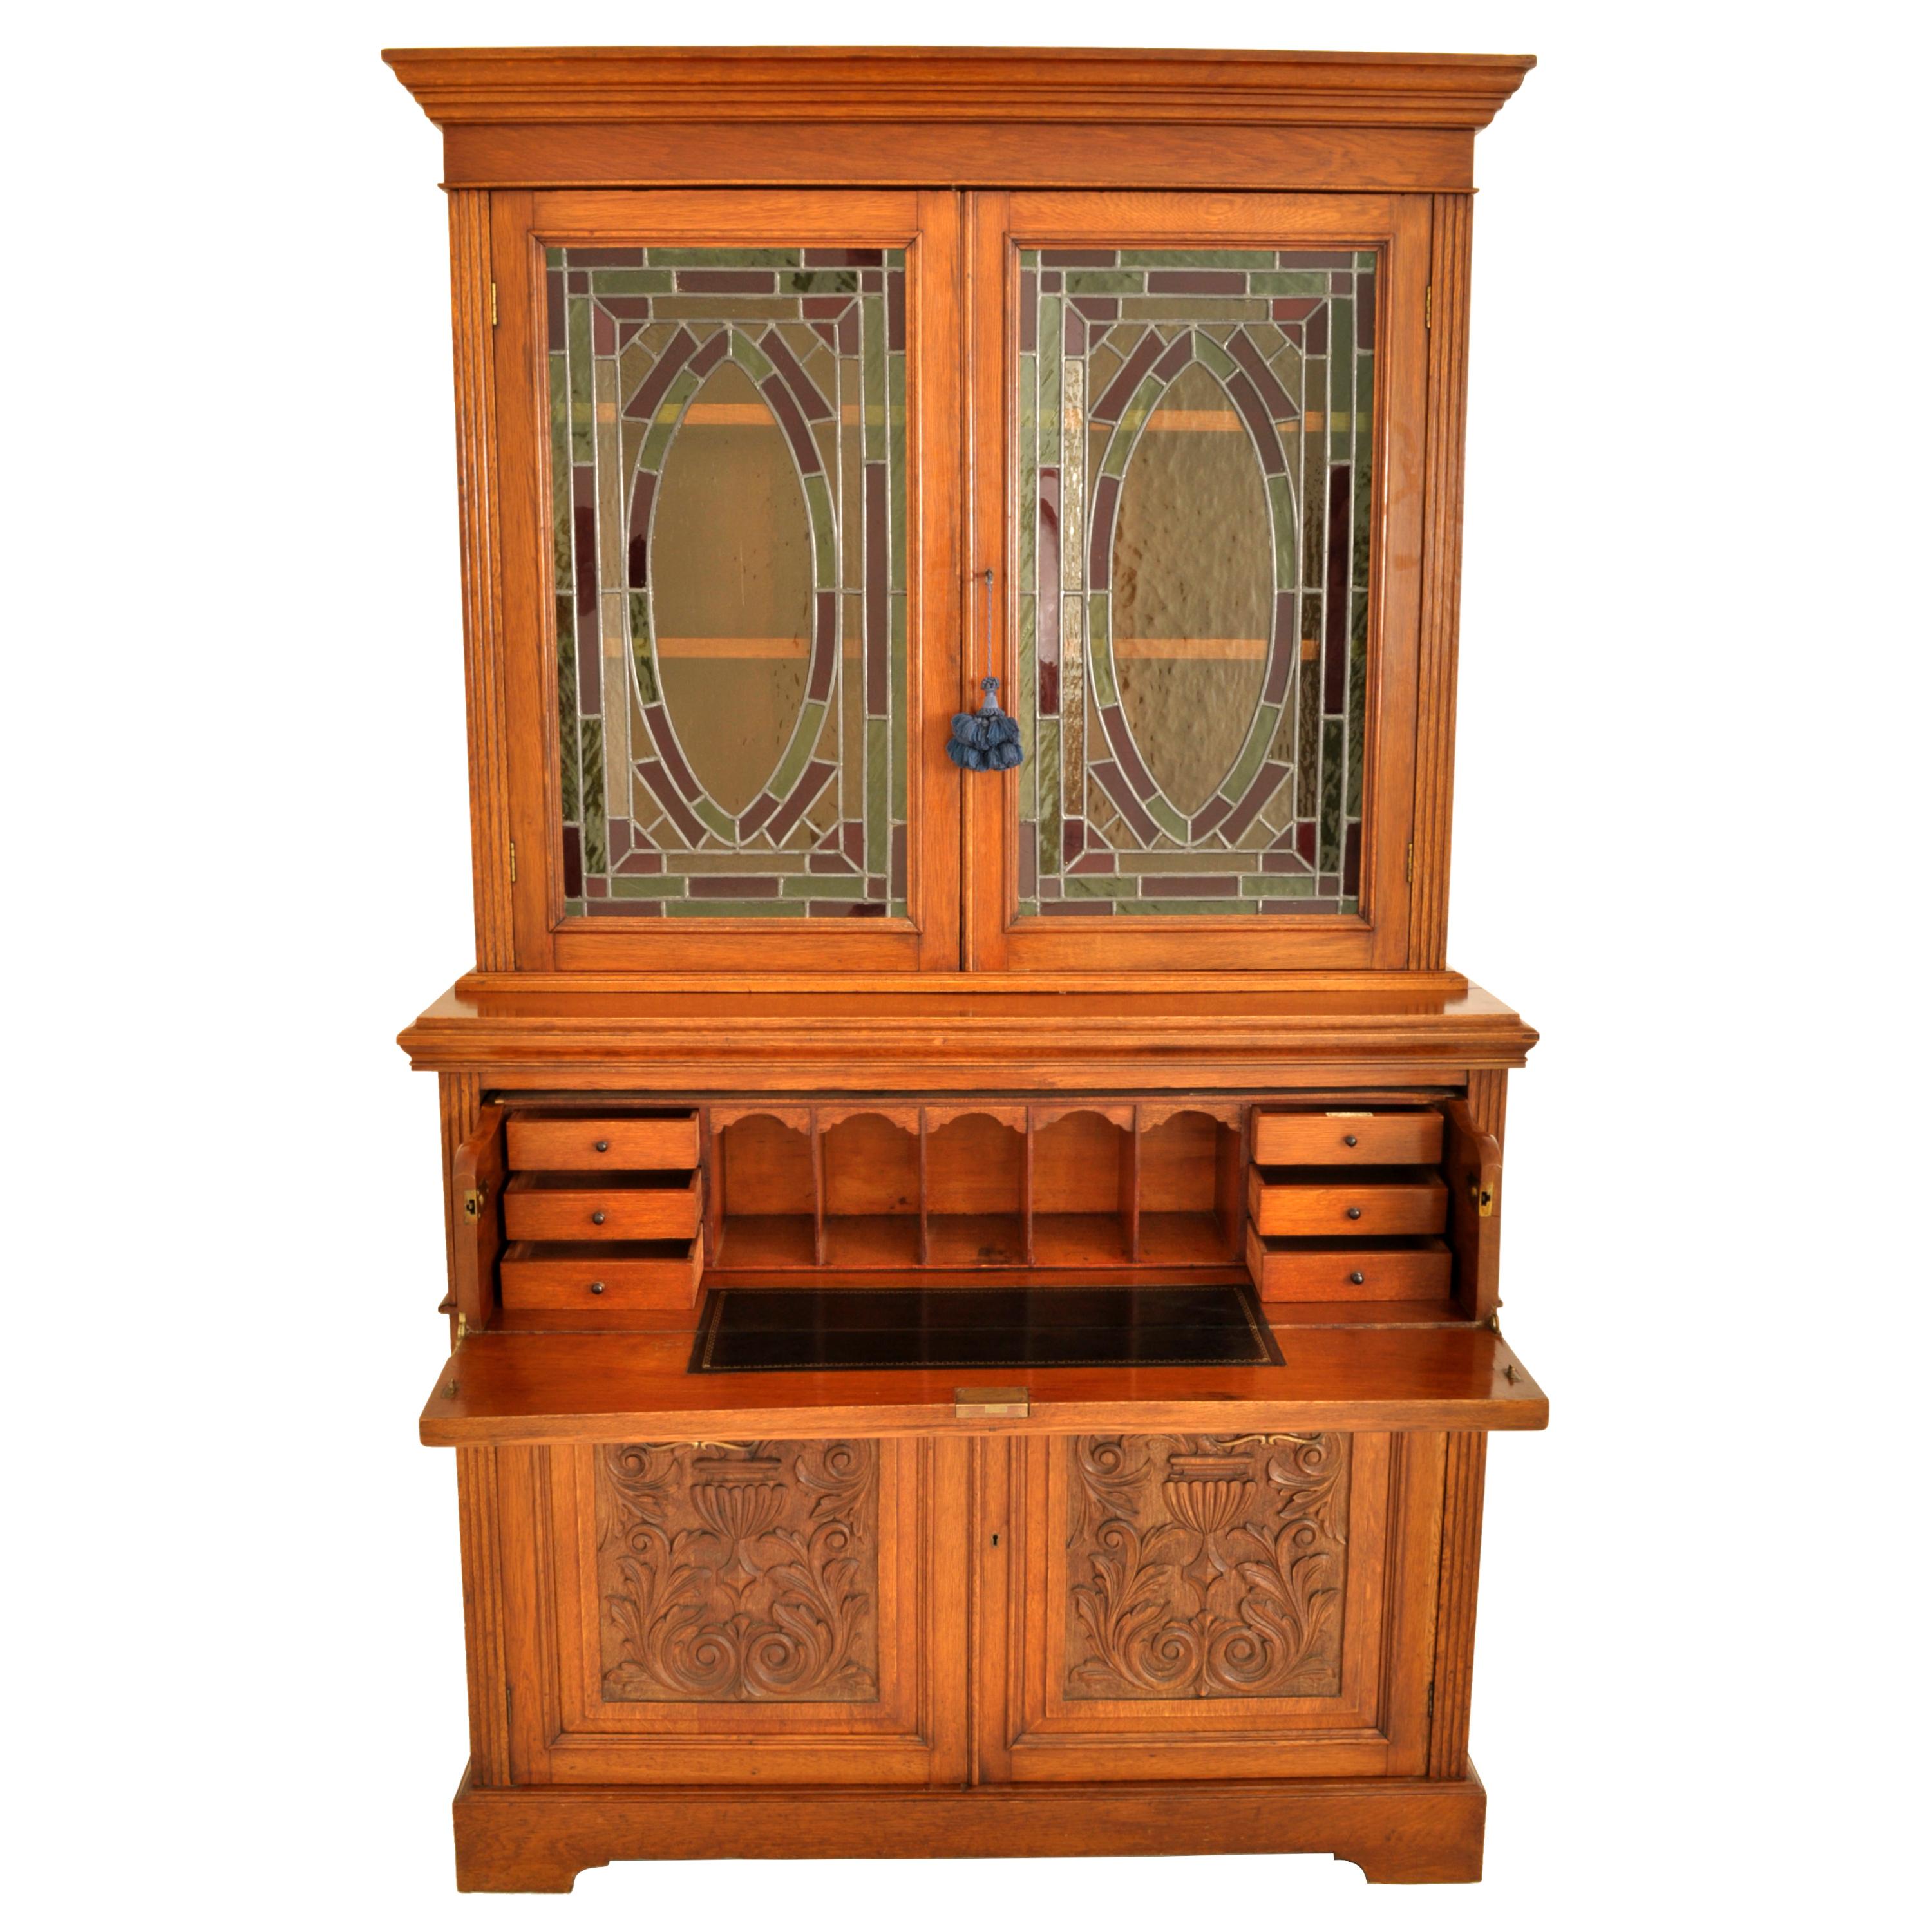 A good English Aesthetic Movement carved ash and leaded/stained glass secretary bookacse, circa 1890.
The bookcase desk in two parts, the top with a stepped cornice, below is a pair of doors with colored leaded glass panels with a central oval